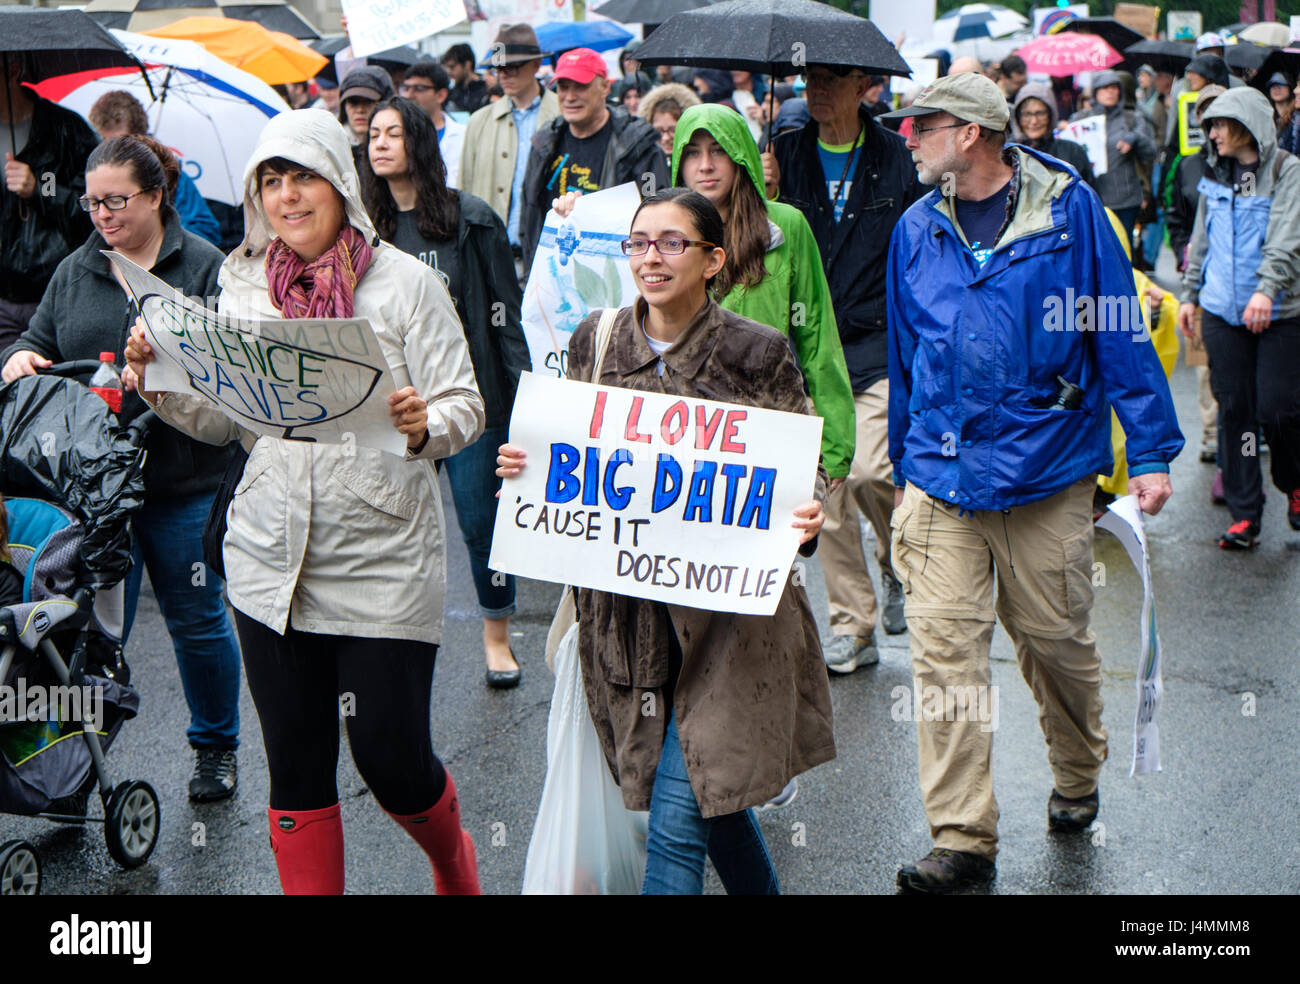 March for Science rally on Earth Day, Washington DC, USA, April 22, 2017. Activists and protesters marching along Constitution Avenue to the United St Stock Photo